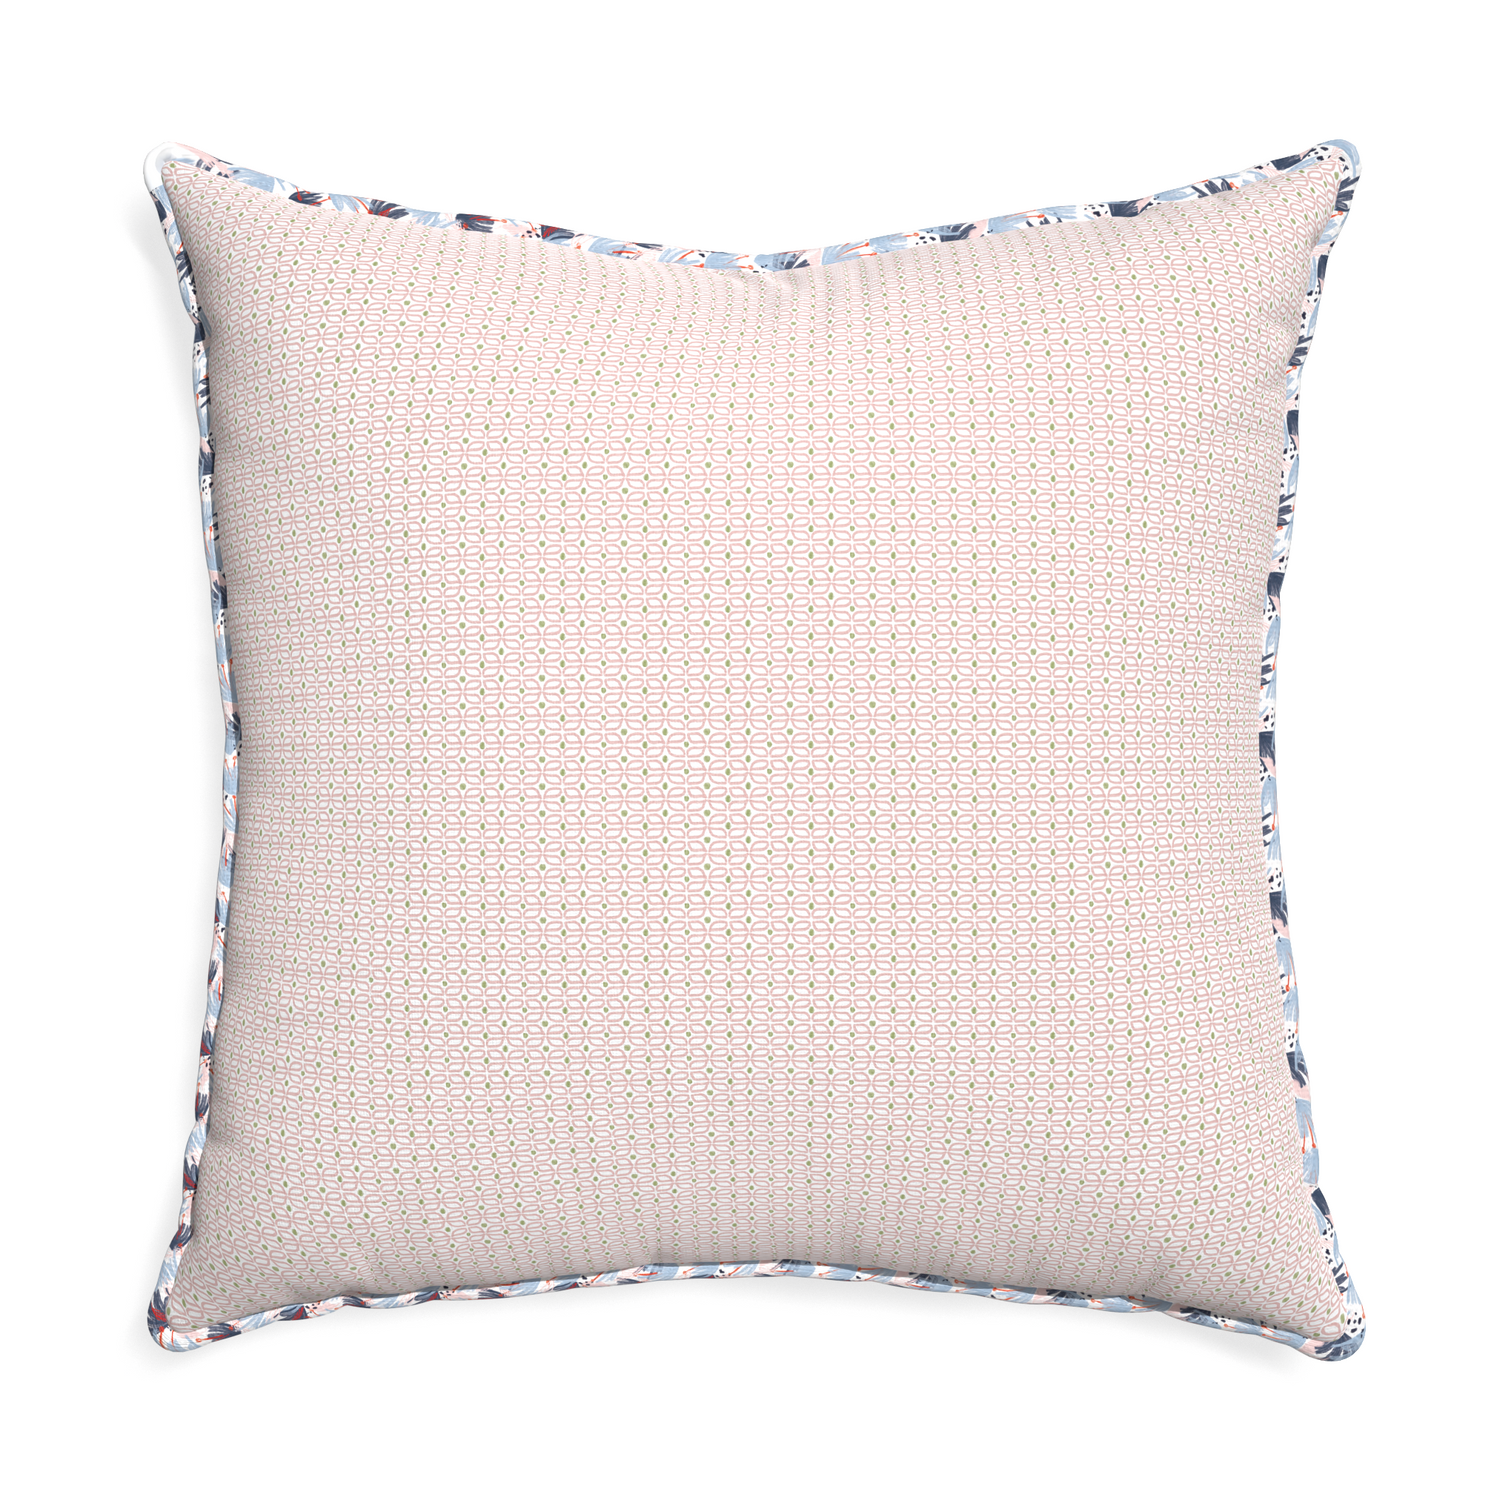 Euro-sham loomi pink custom pillow with e piping on white background